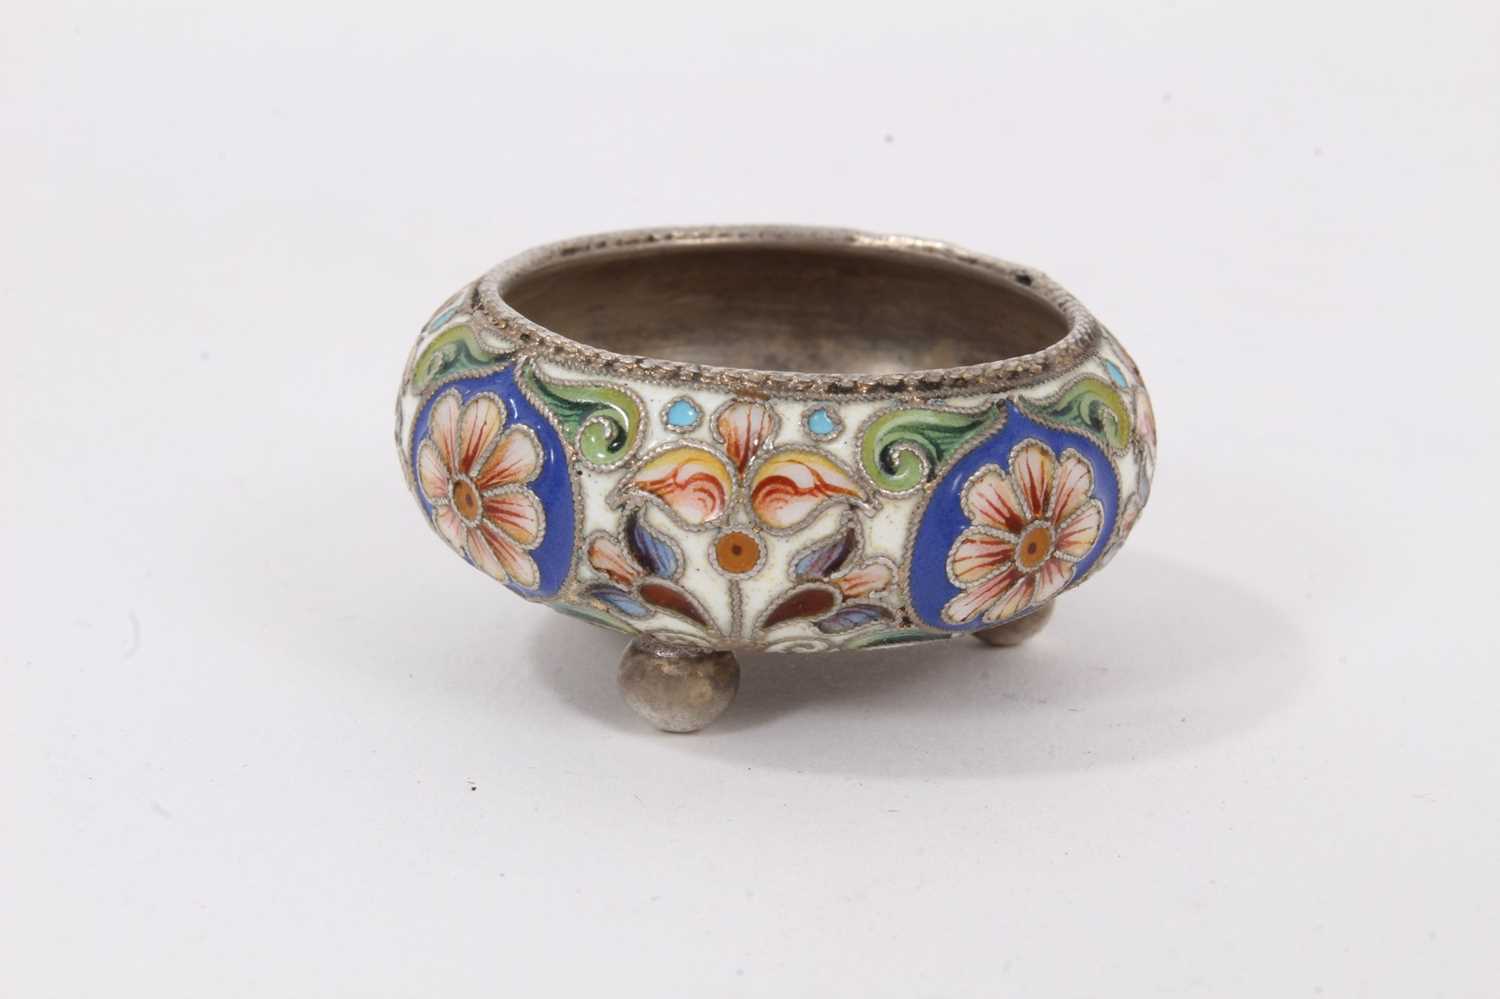 Late 19th/early 20th century Russian cloisonné salt - Image 2 of 6